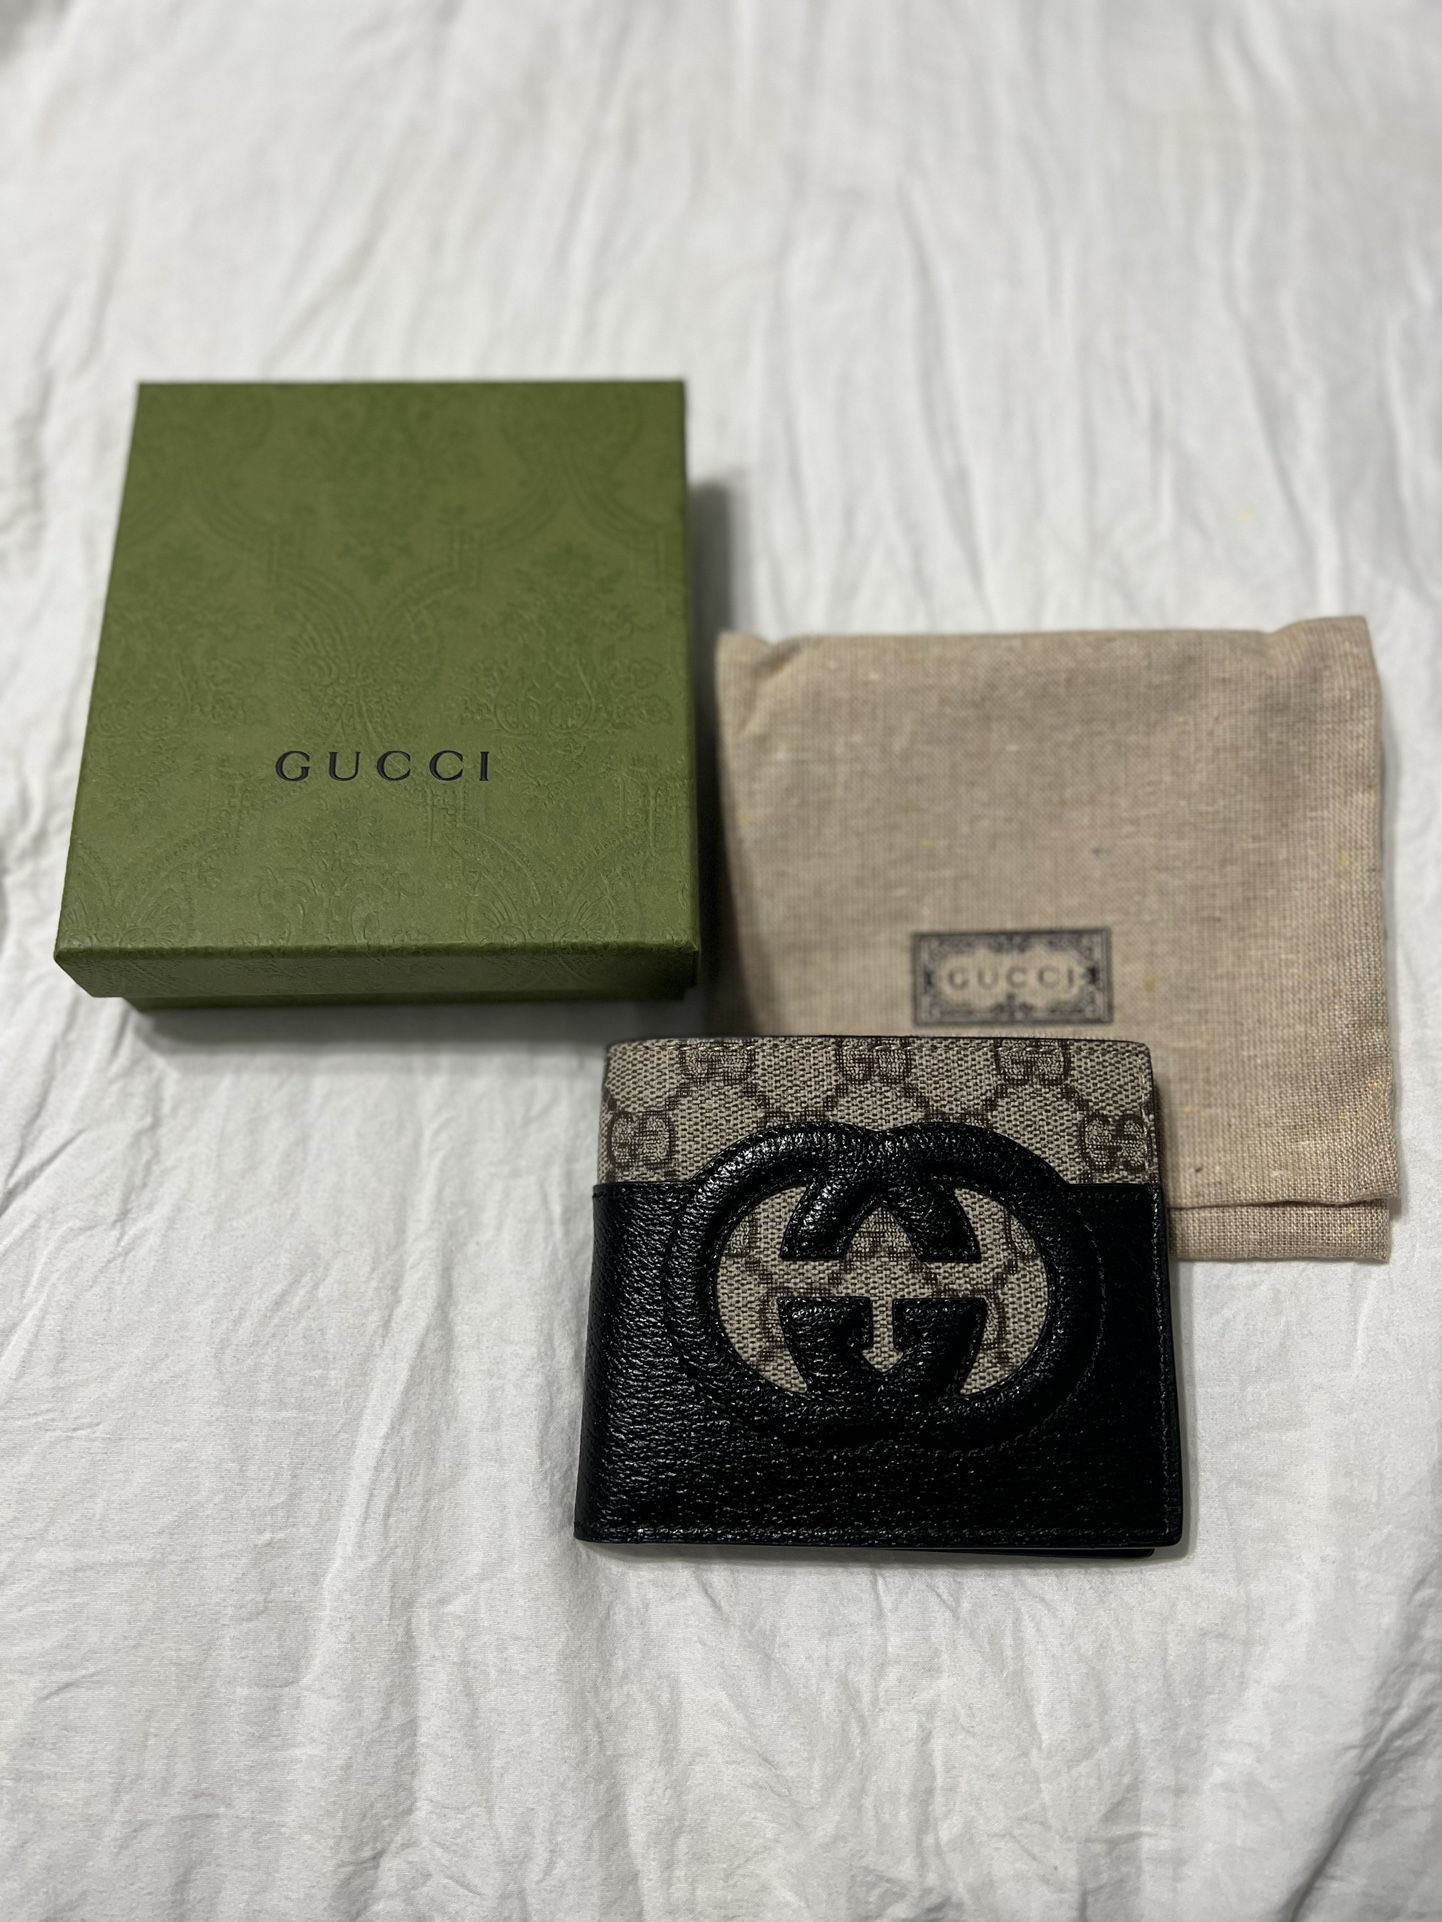 Authentic Gucci Wallet (New)